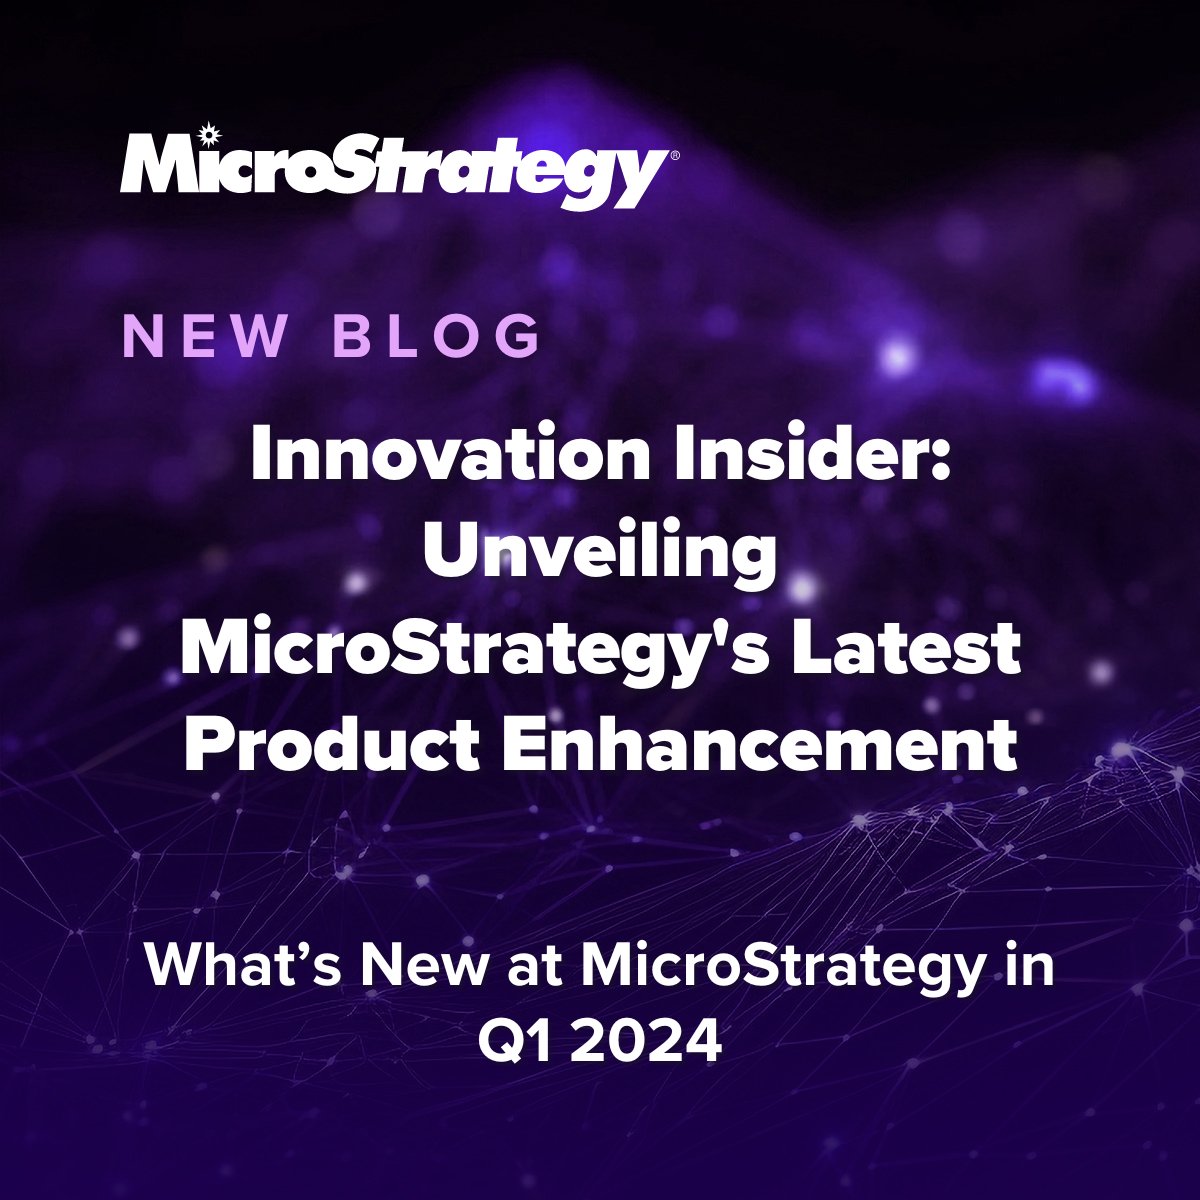 🚀 Dive into the latest in data analytics with our Quarterly What's New for Q1 2024! Discover how #MicroStrategy is innovating to drive your business forward. Check it out here ow.ly/cGko50RgfTG #DataAnalytics #Innovation #AI #MicroStrategyAI #TheONEPlatform